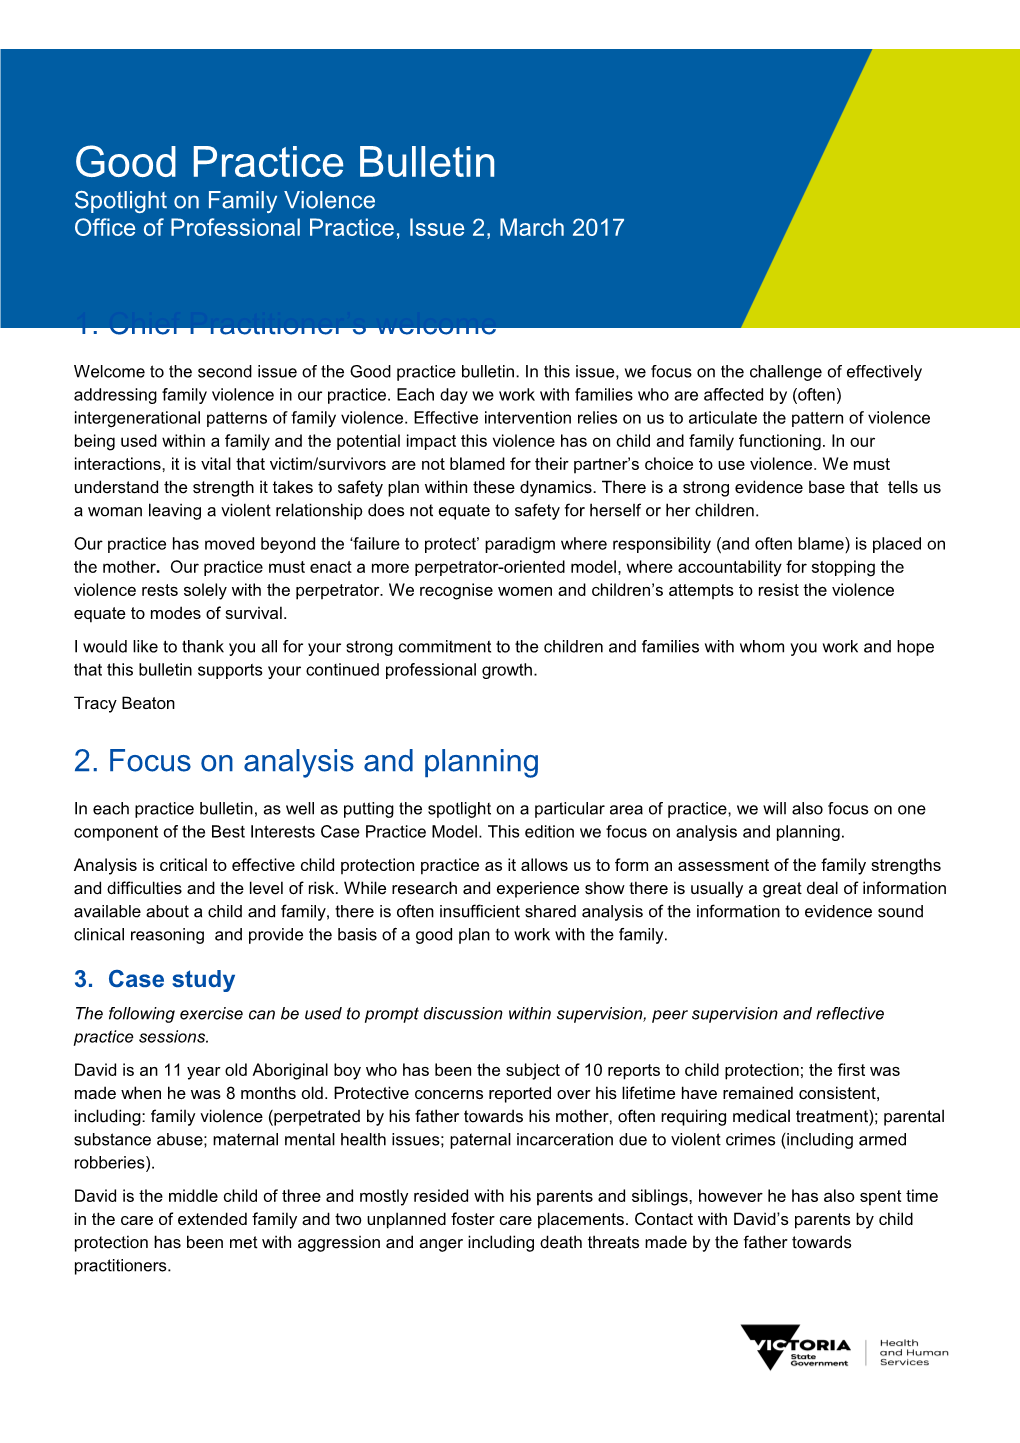 Good Practice Bulletin Spotlight on Family Violence Office of Professional Practice, Issue